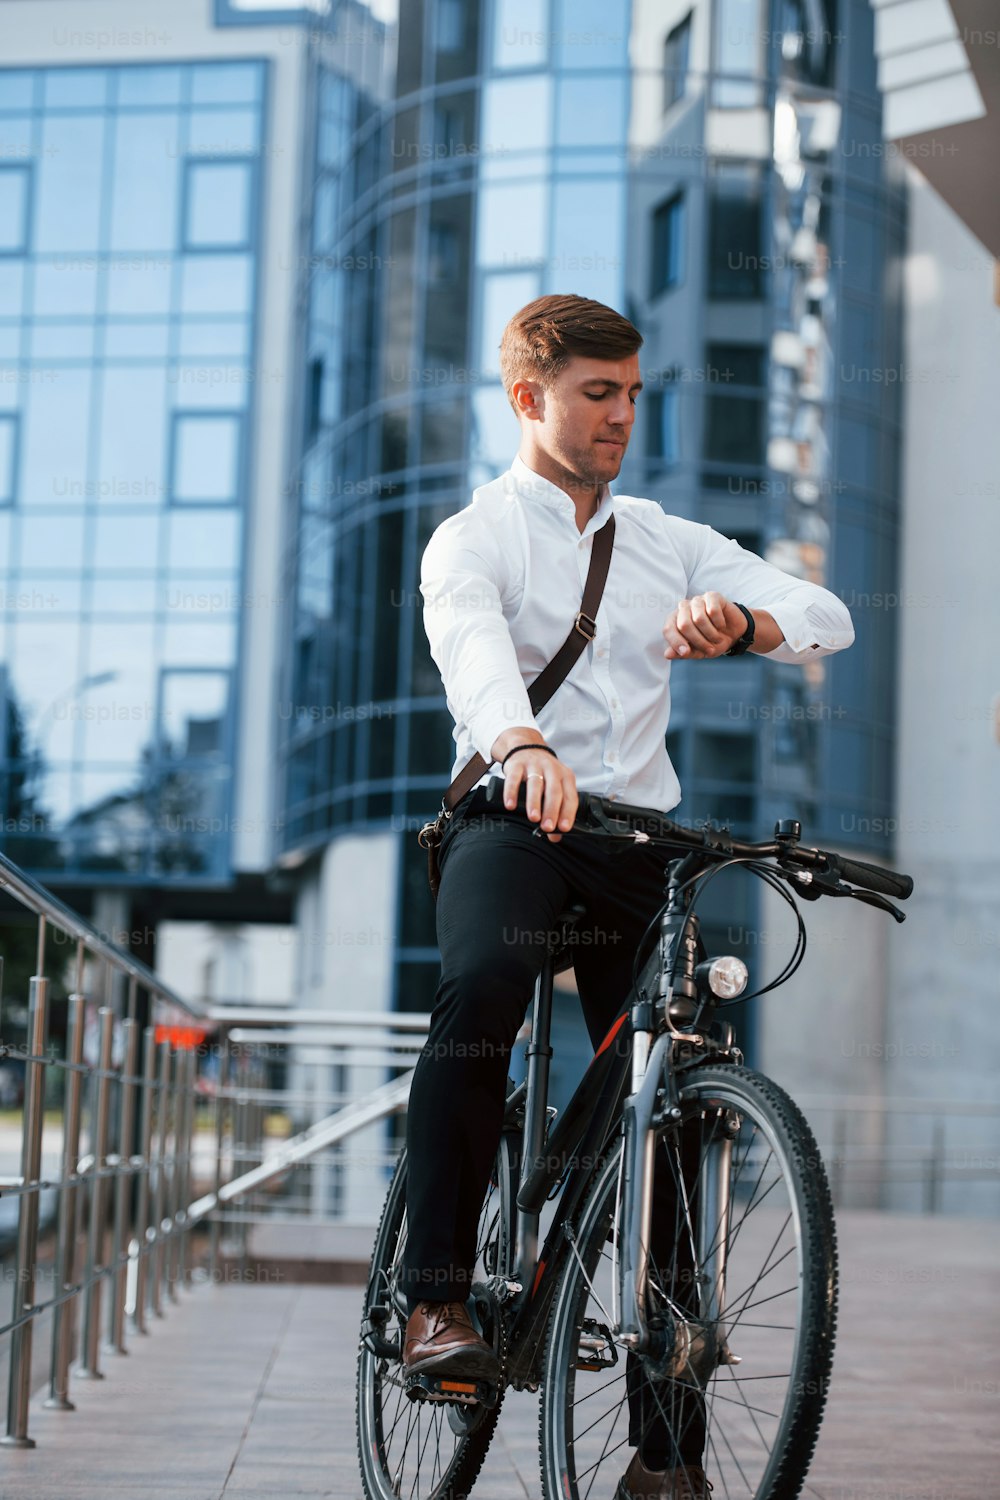 Looks at watch. Businessman in formal clothes with black bicycle is in the city.